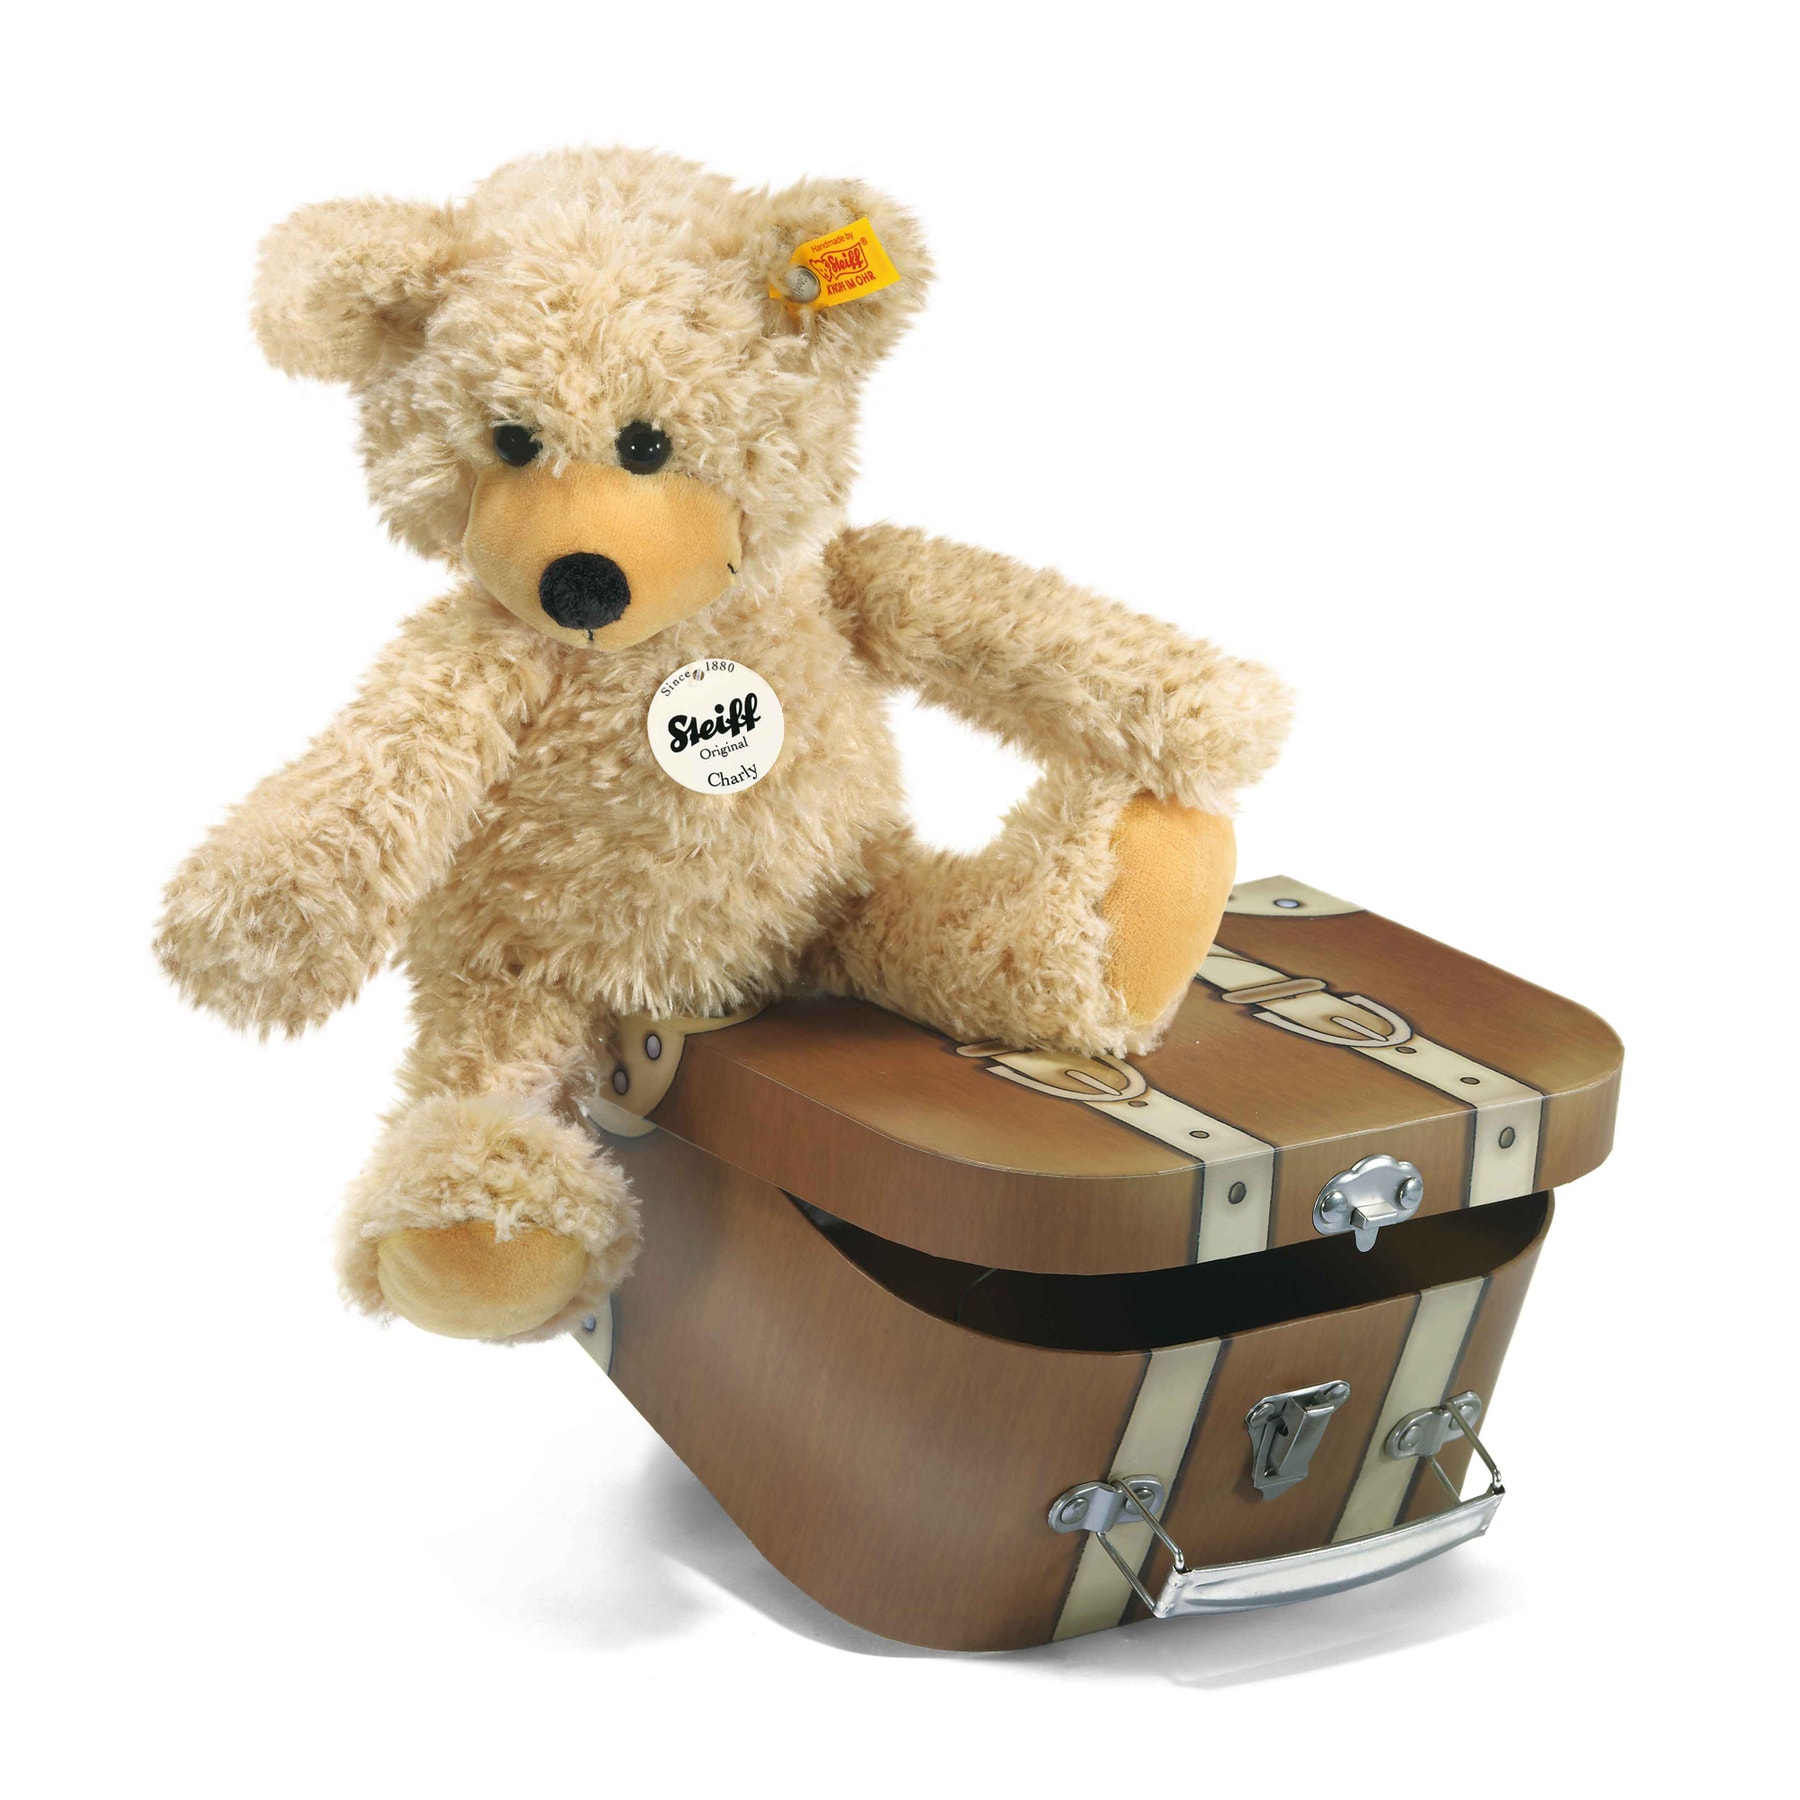 Charly Dangling Teddy In Suitcase